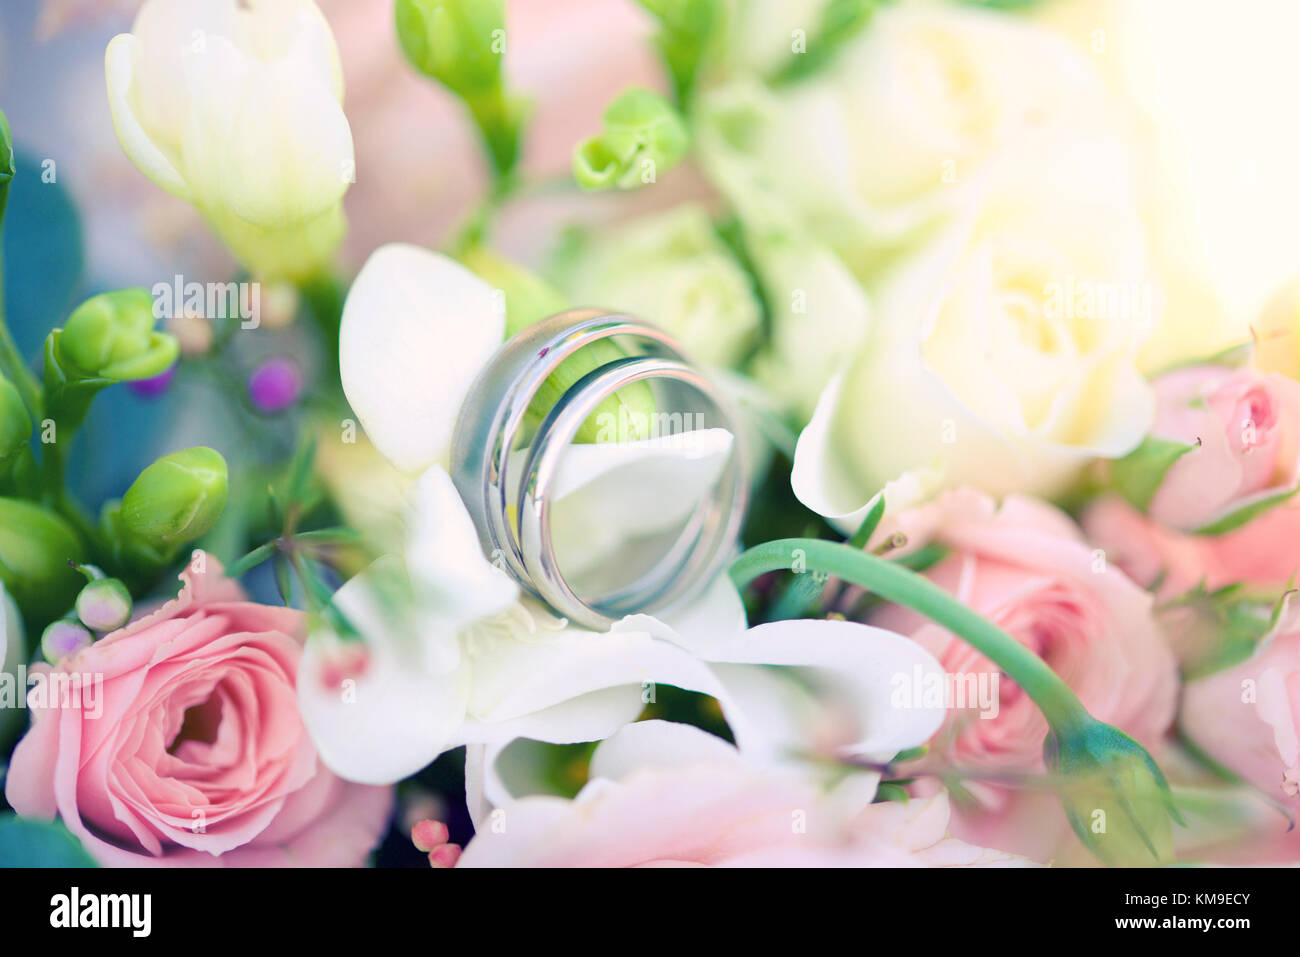 Wedding rings and bouquet of flowers Stock Photo